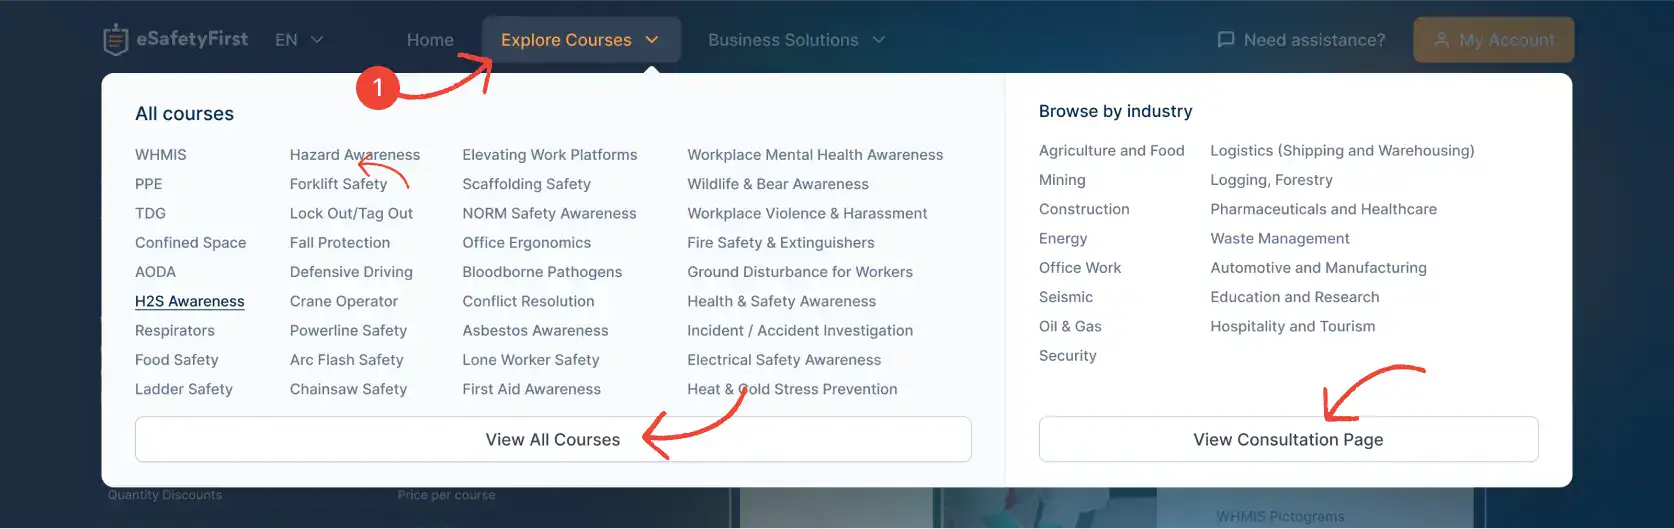 Website menu preview showing 'Explore Courses' with a list of all available courses and a glimpse of the 'Consultation Page' highlighting different industries for guidance on course selection.